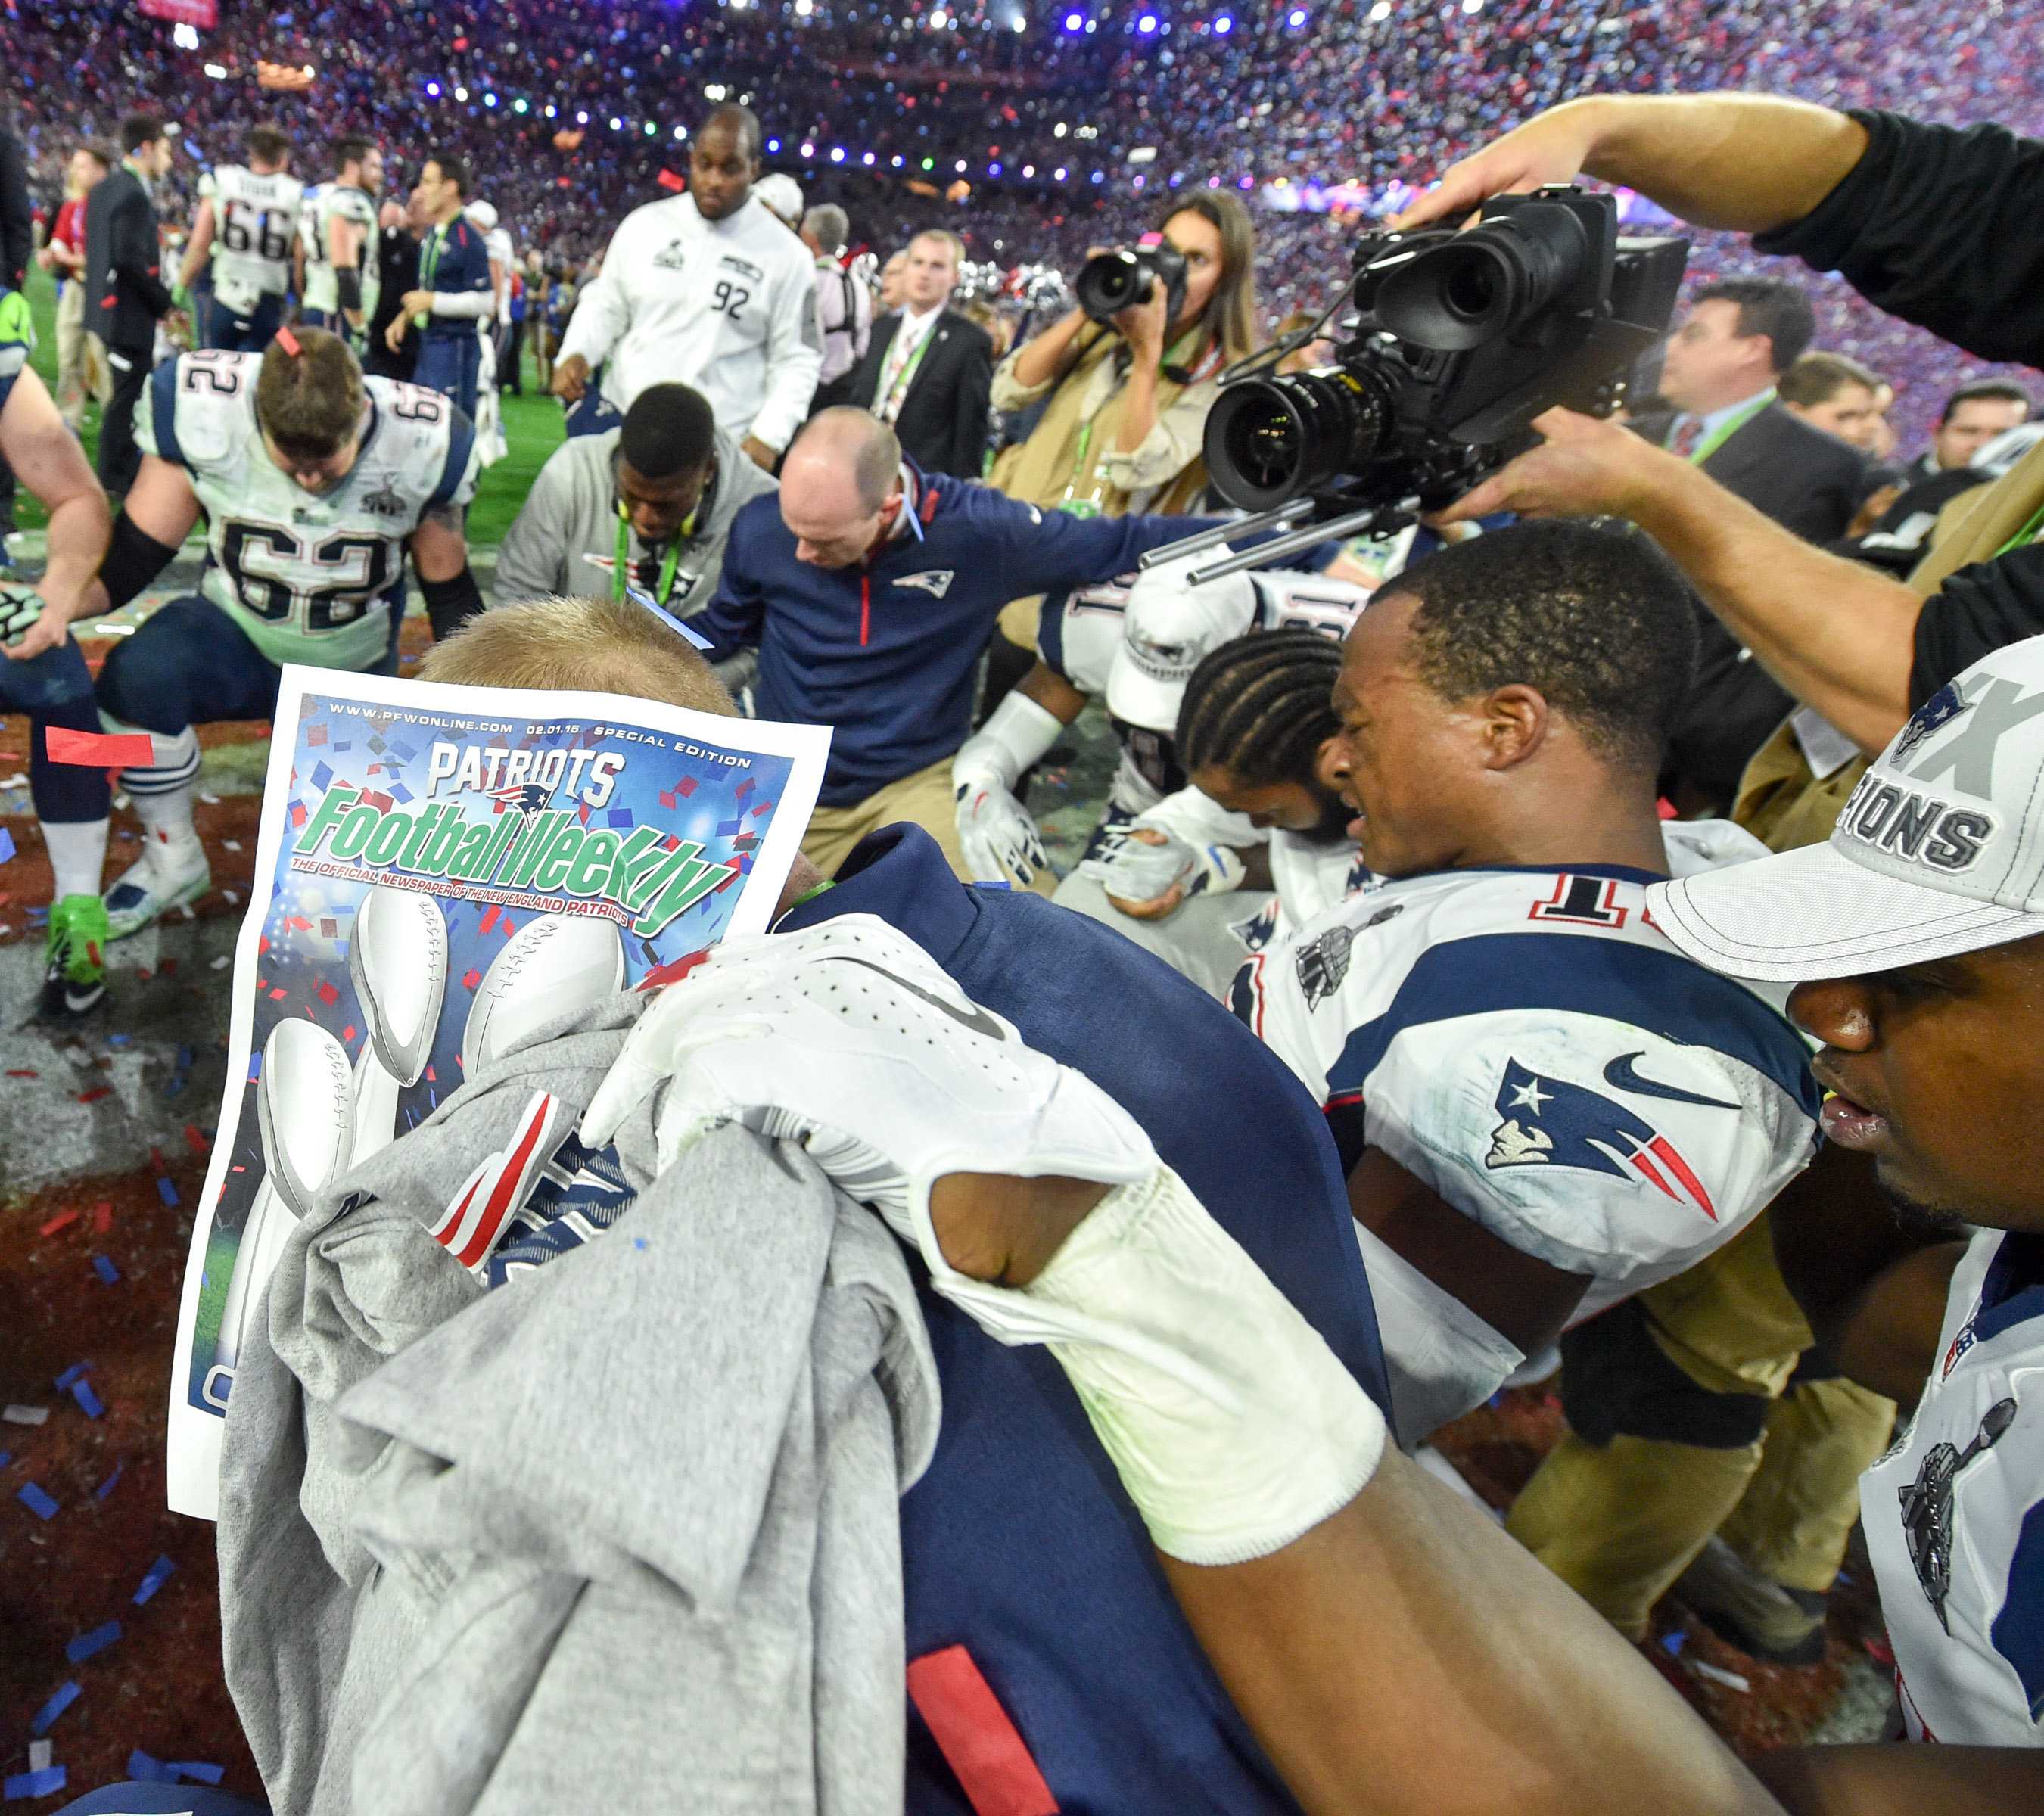 The New England Patriots celebrate their Super Bowl XLIX win over the Seattle Seahawks, 28-24. Photo courtesy of Tribune News Services.